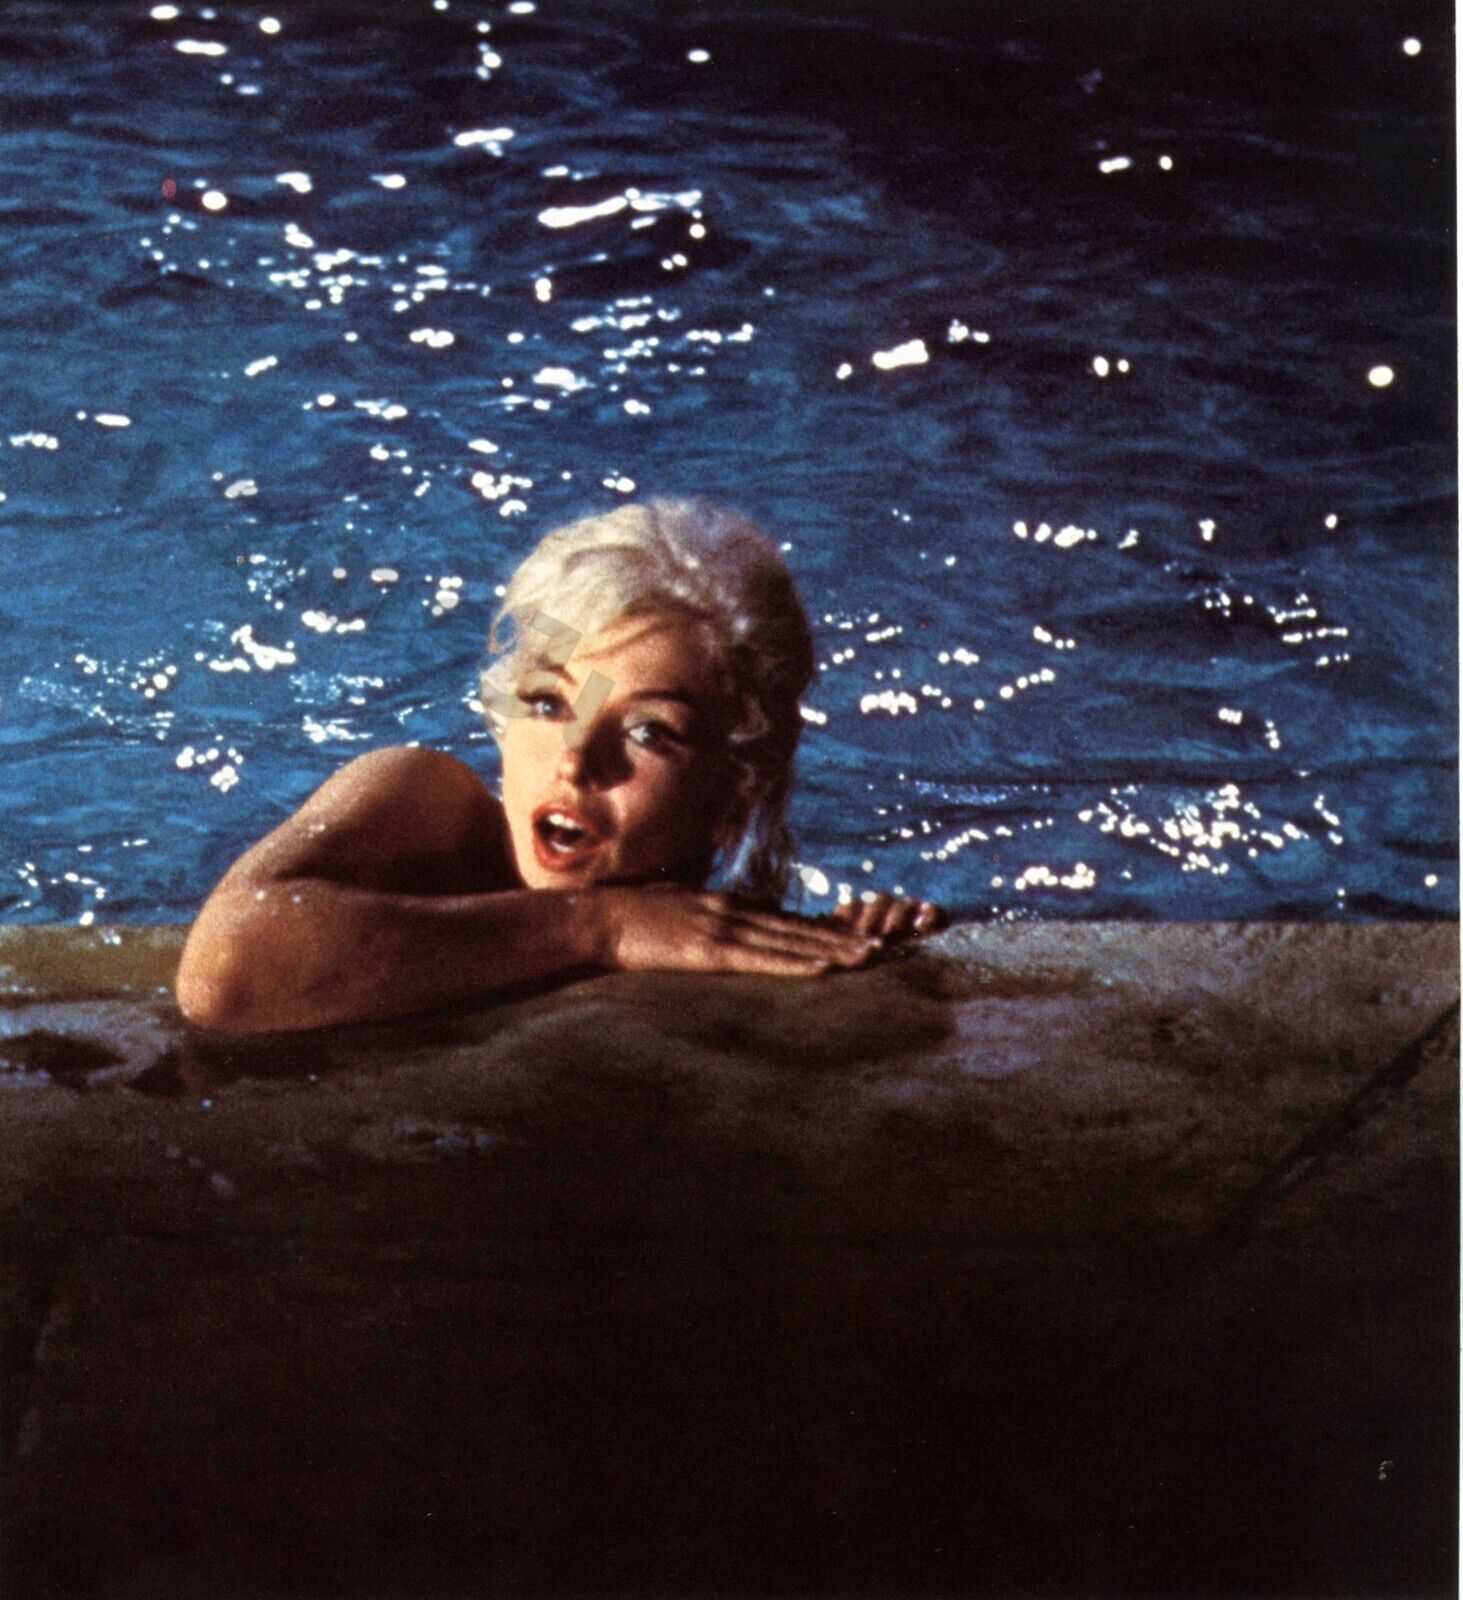 Marilyn Monroe Swimming No Swimsuit Sexy BOOK PAGE PHOTO (901) 2 pcs